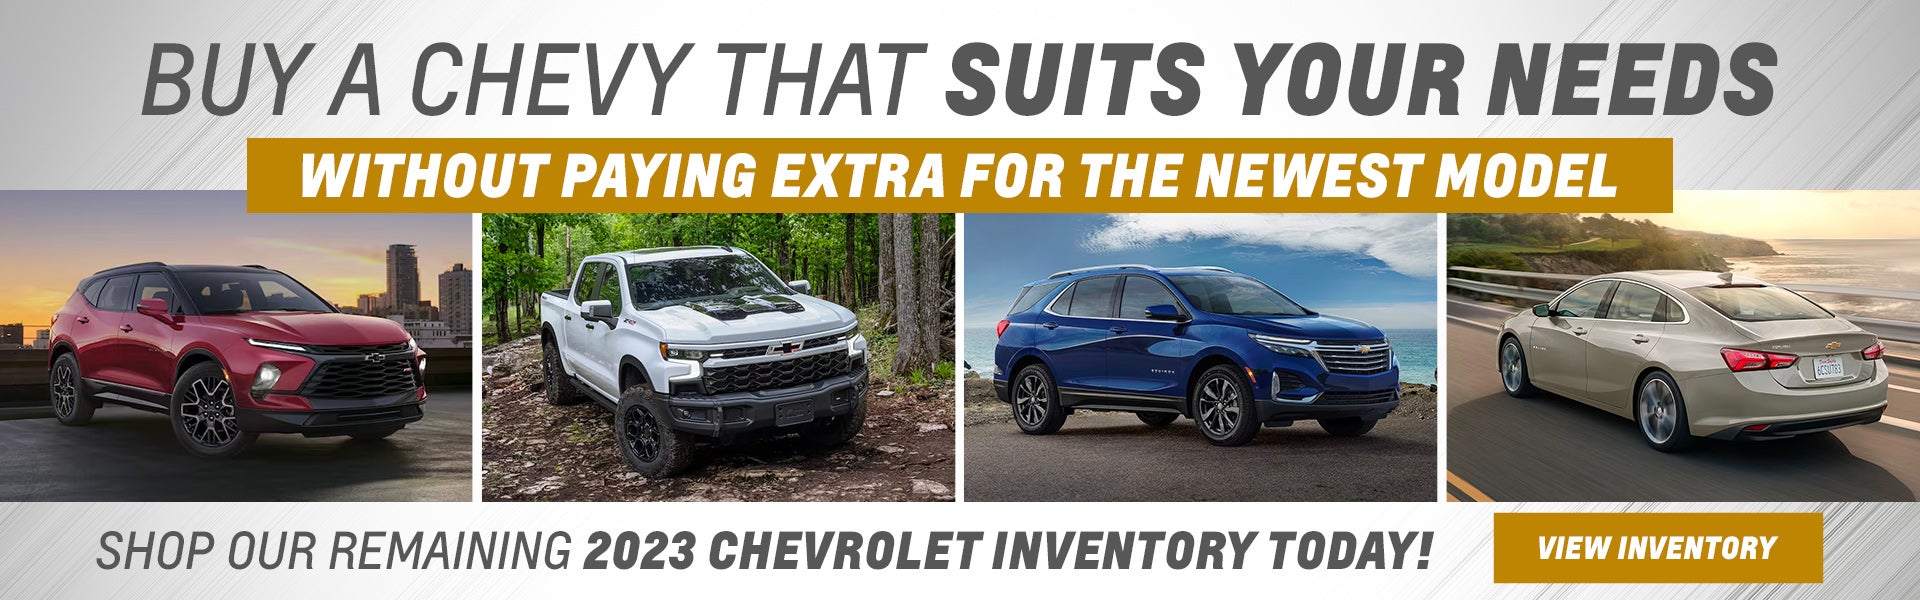 Shop Remaining 2023 Chevrolet Inventory Today